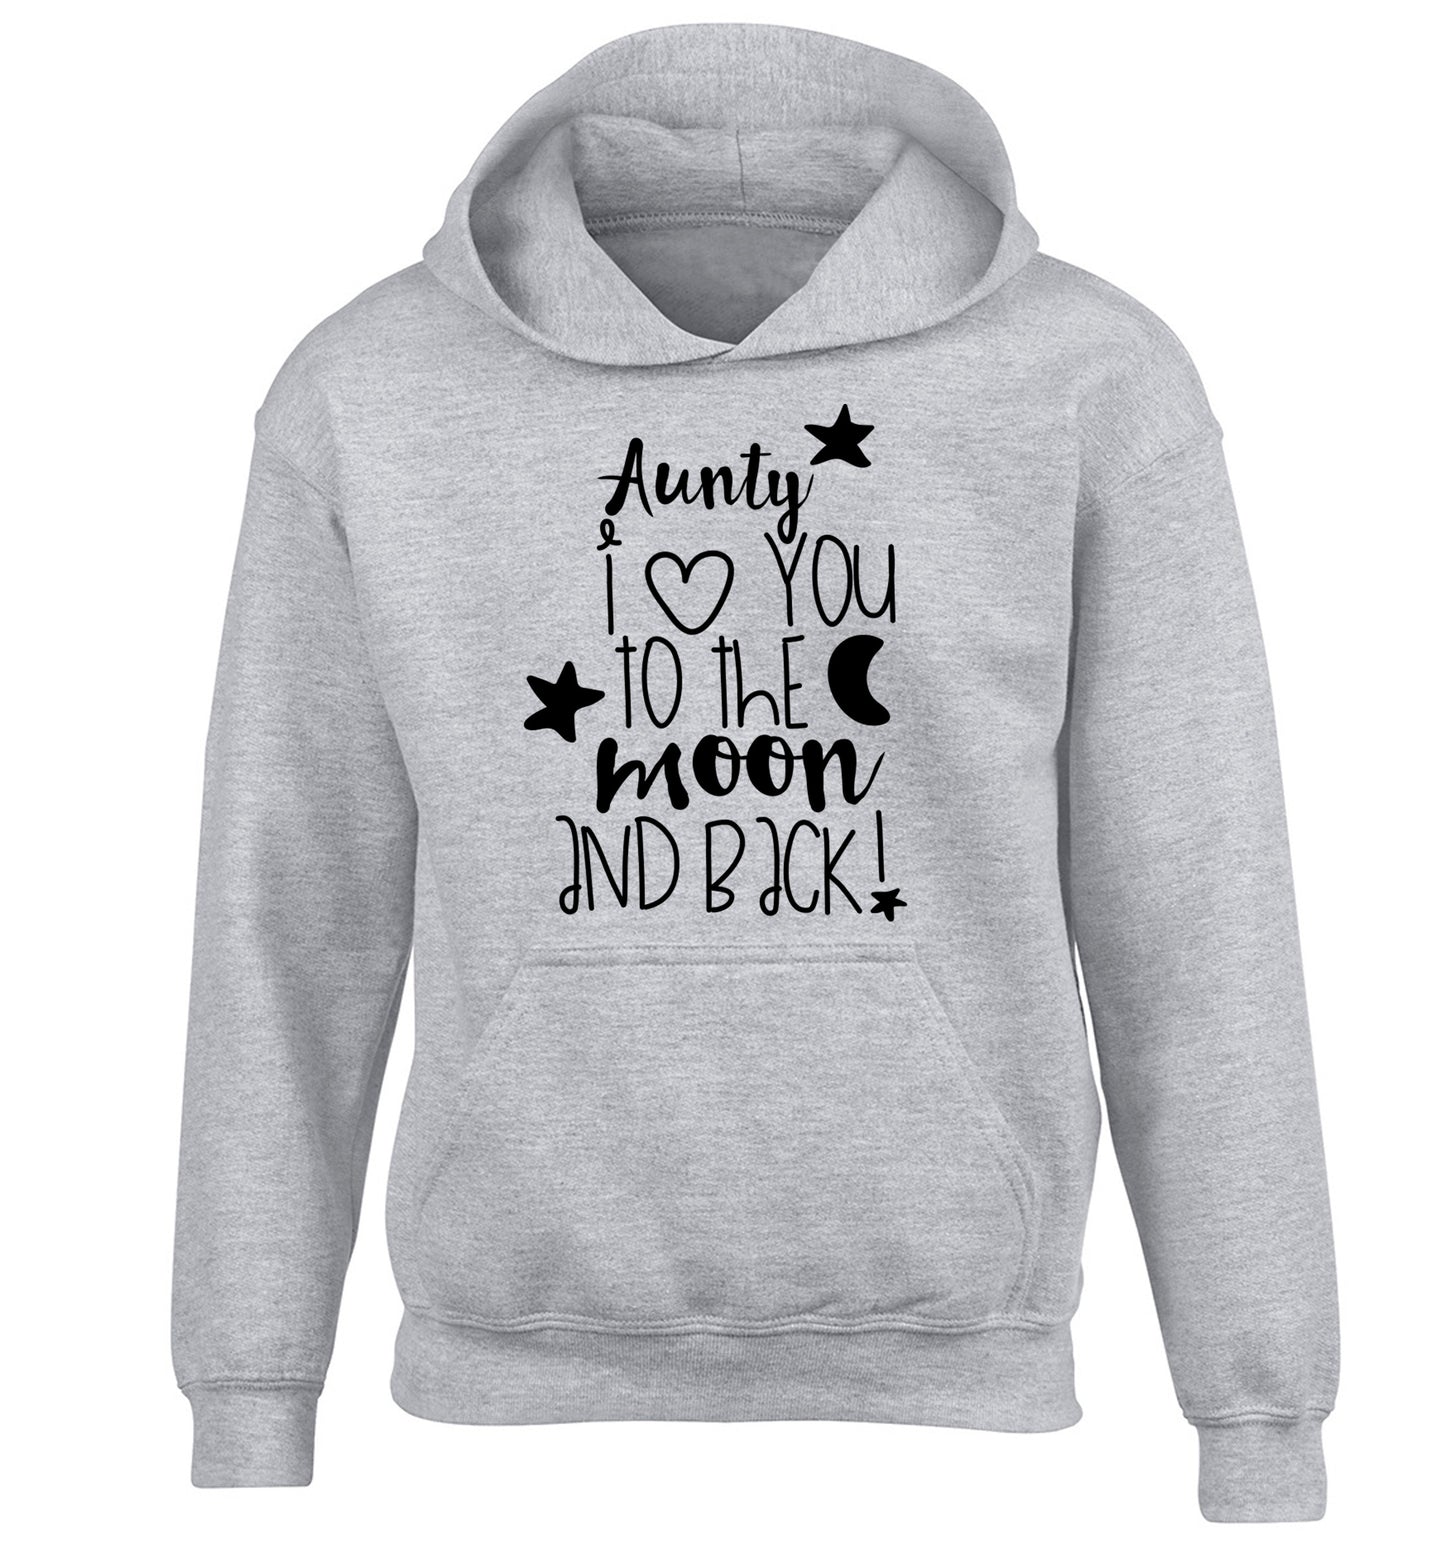 Aunty I love you to the moon and back children's grey hoodie 12-14 Years